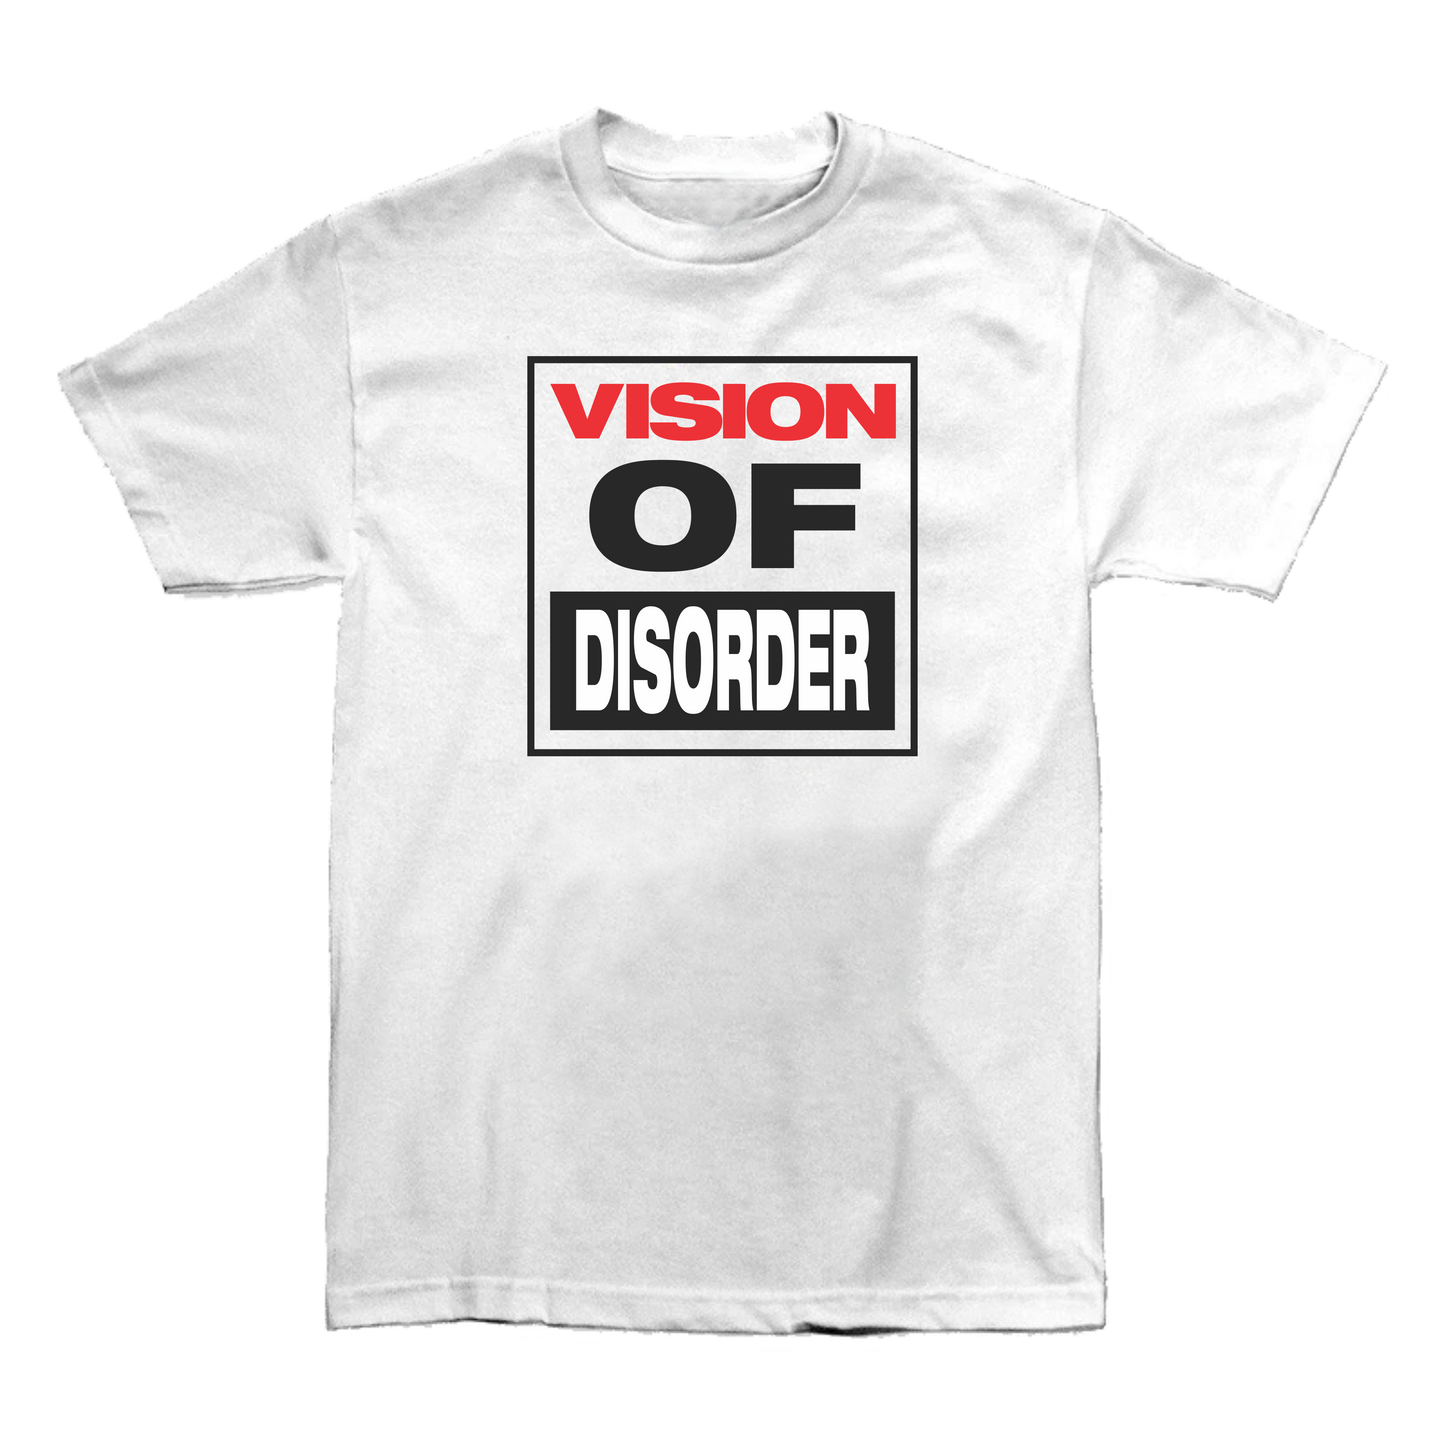 VISION OF DISORDER STREET WEAR